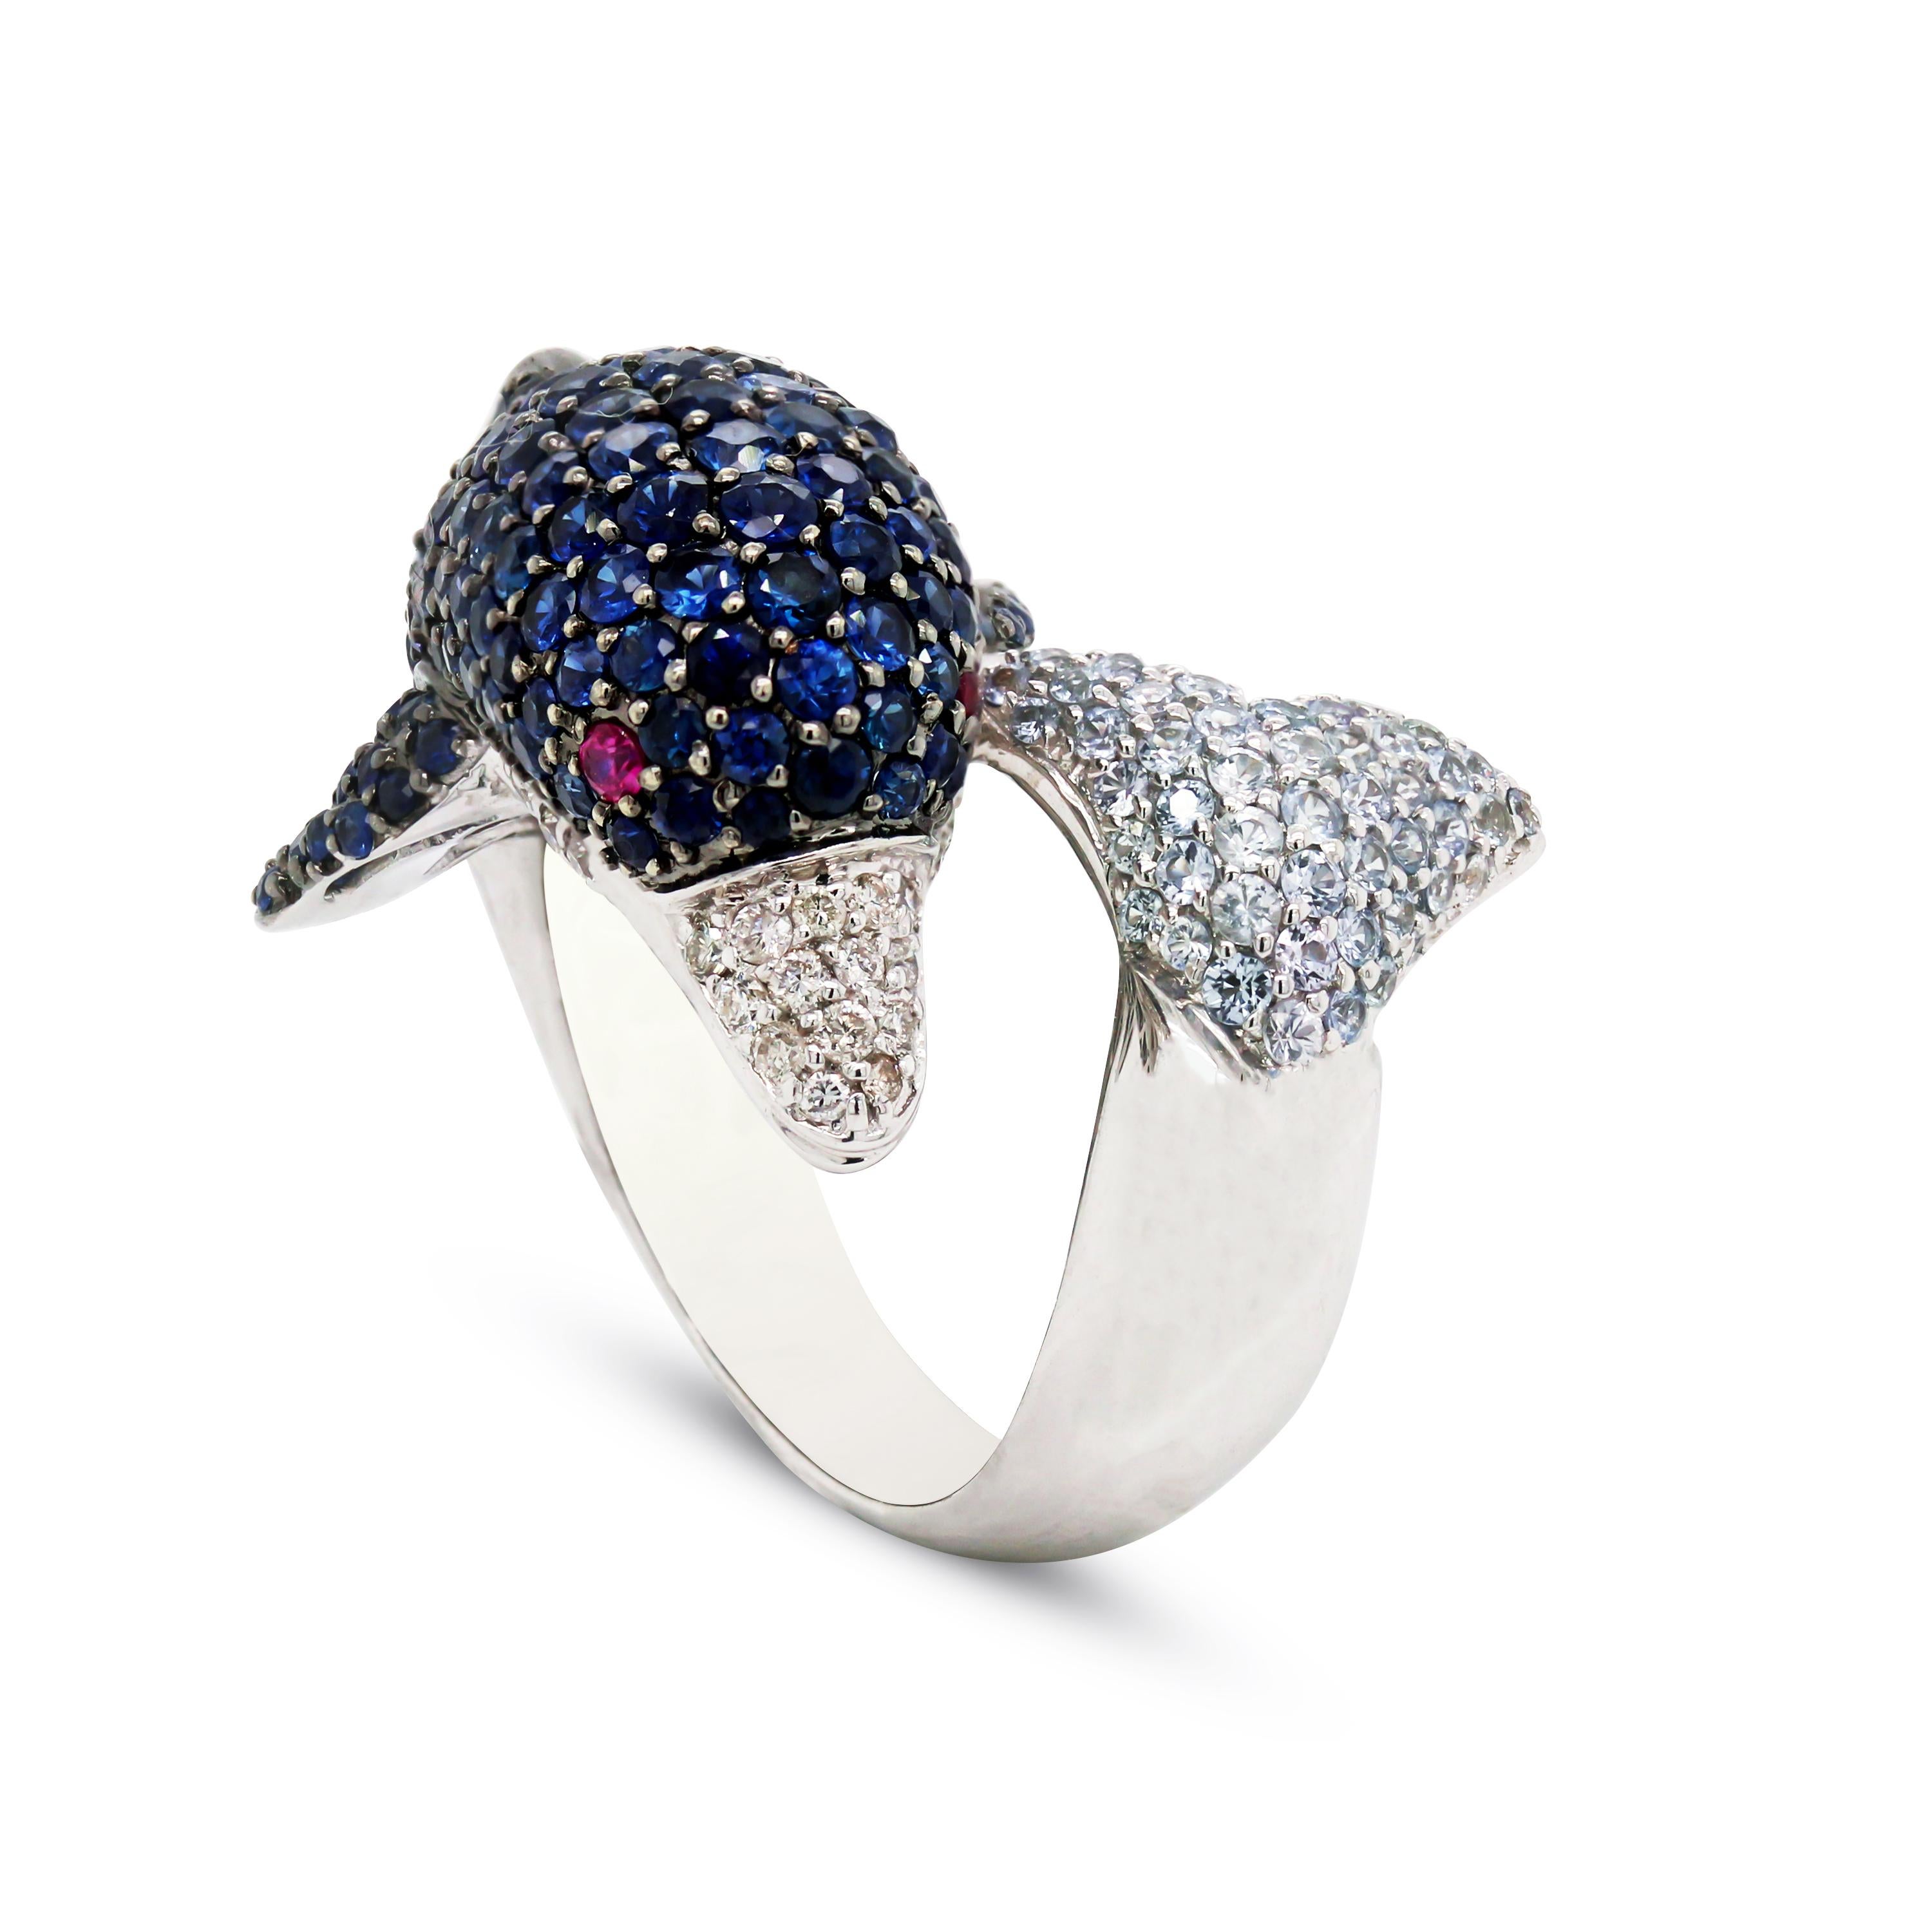 18 Karat White Gold and Diamonds Blue White Sapphires Ruby Dolphin Bypass Ring

This unique ring features a 3D dolphin with blue sapphires white sapphires and diamonds

0.25 carat G color, VS clarity diamonds
0.75 carat white sapphires
3.50 carat